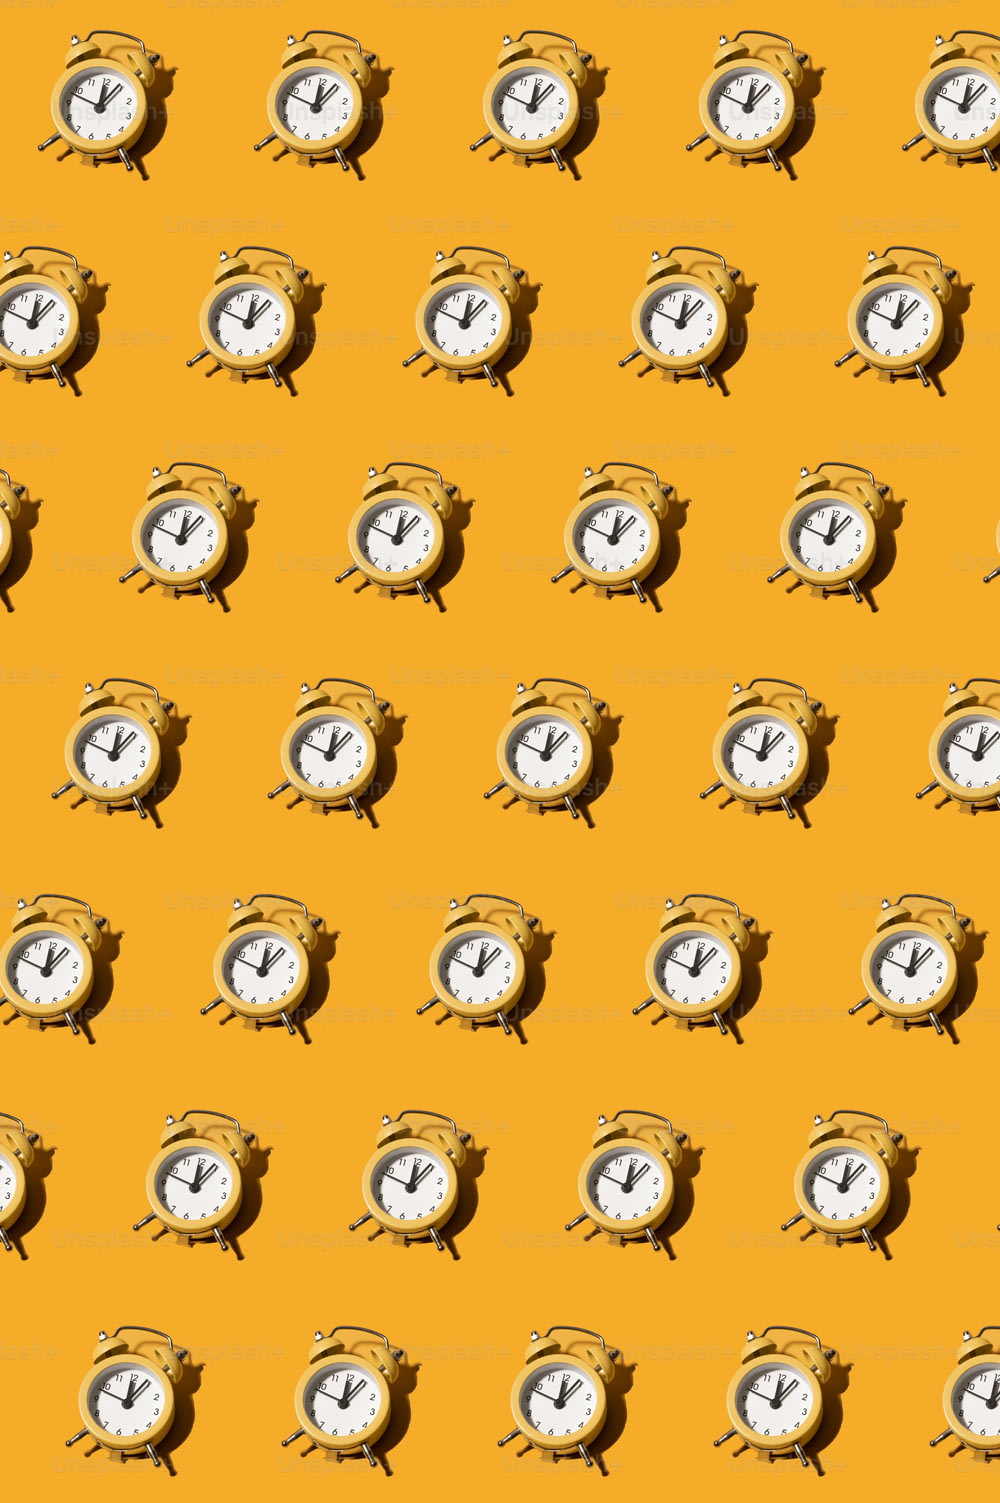 a pattern of clocks on a yellow background